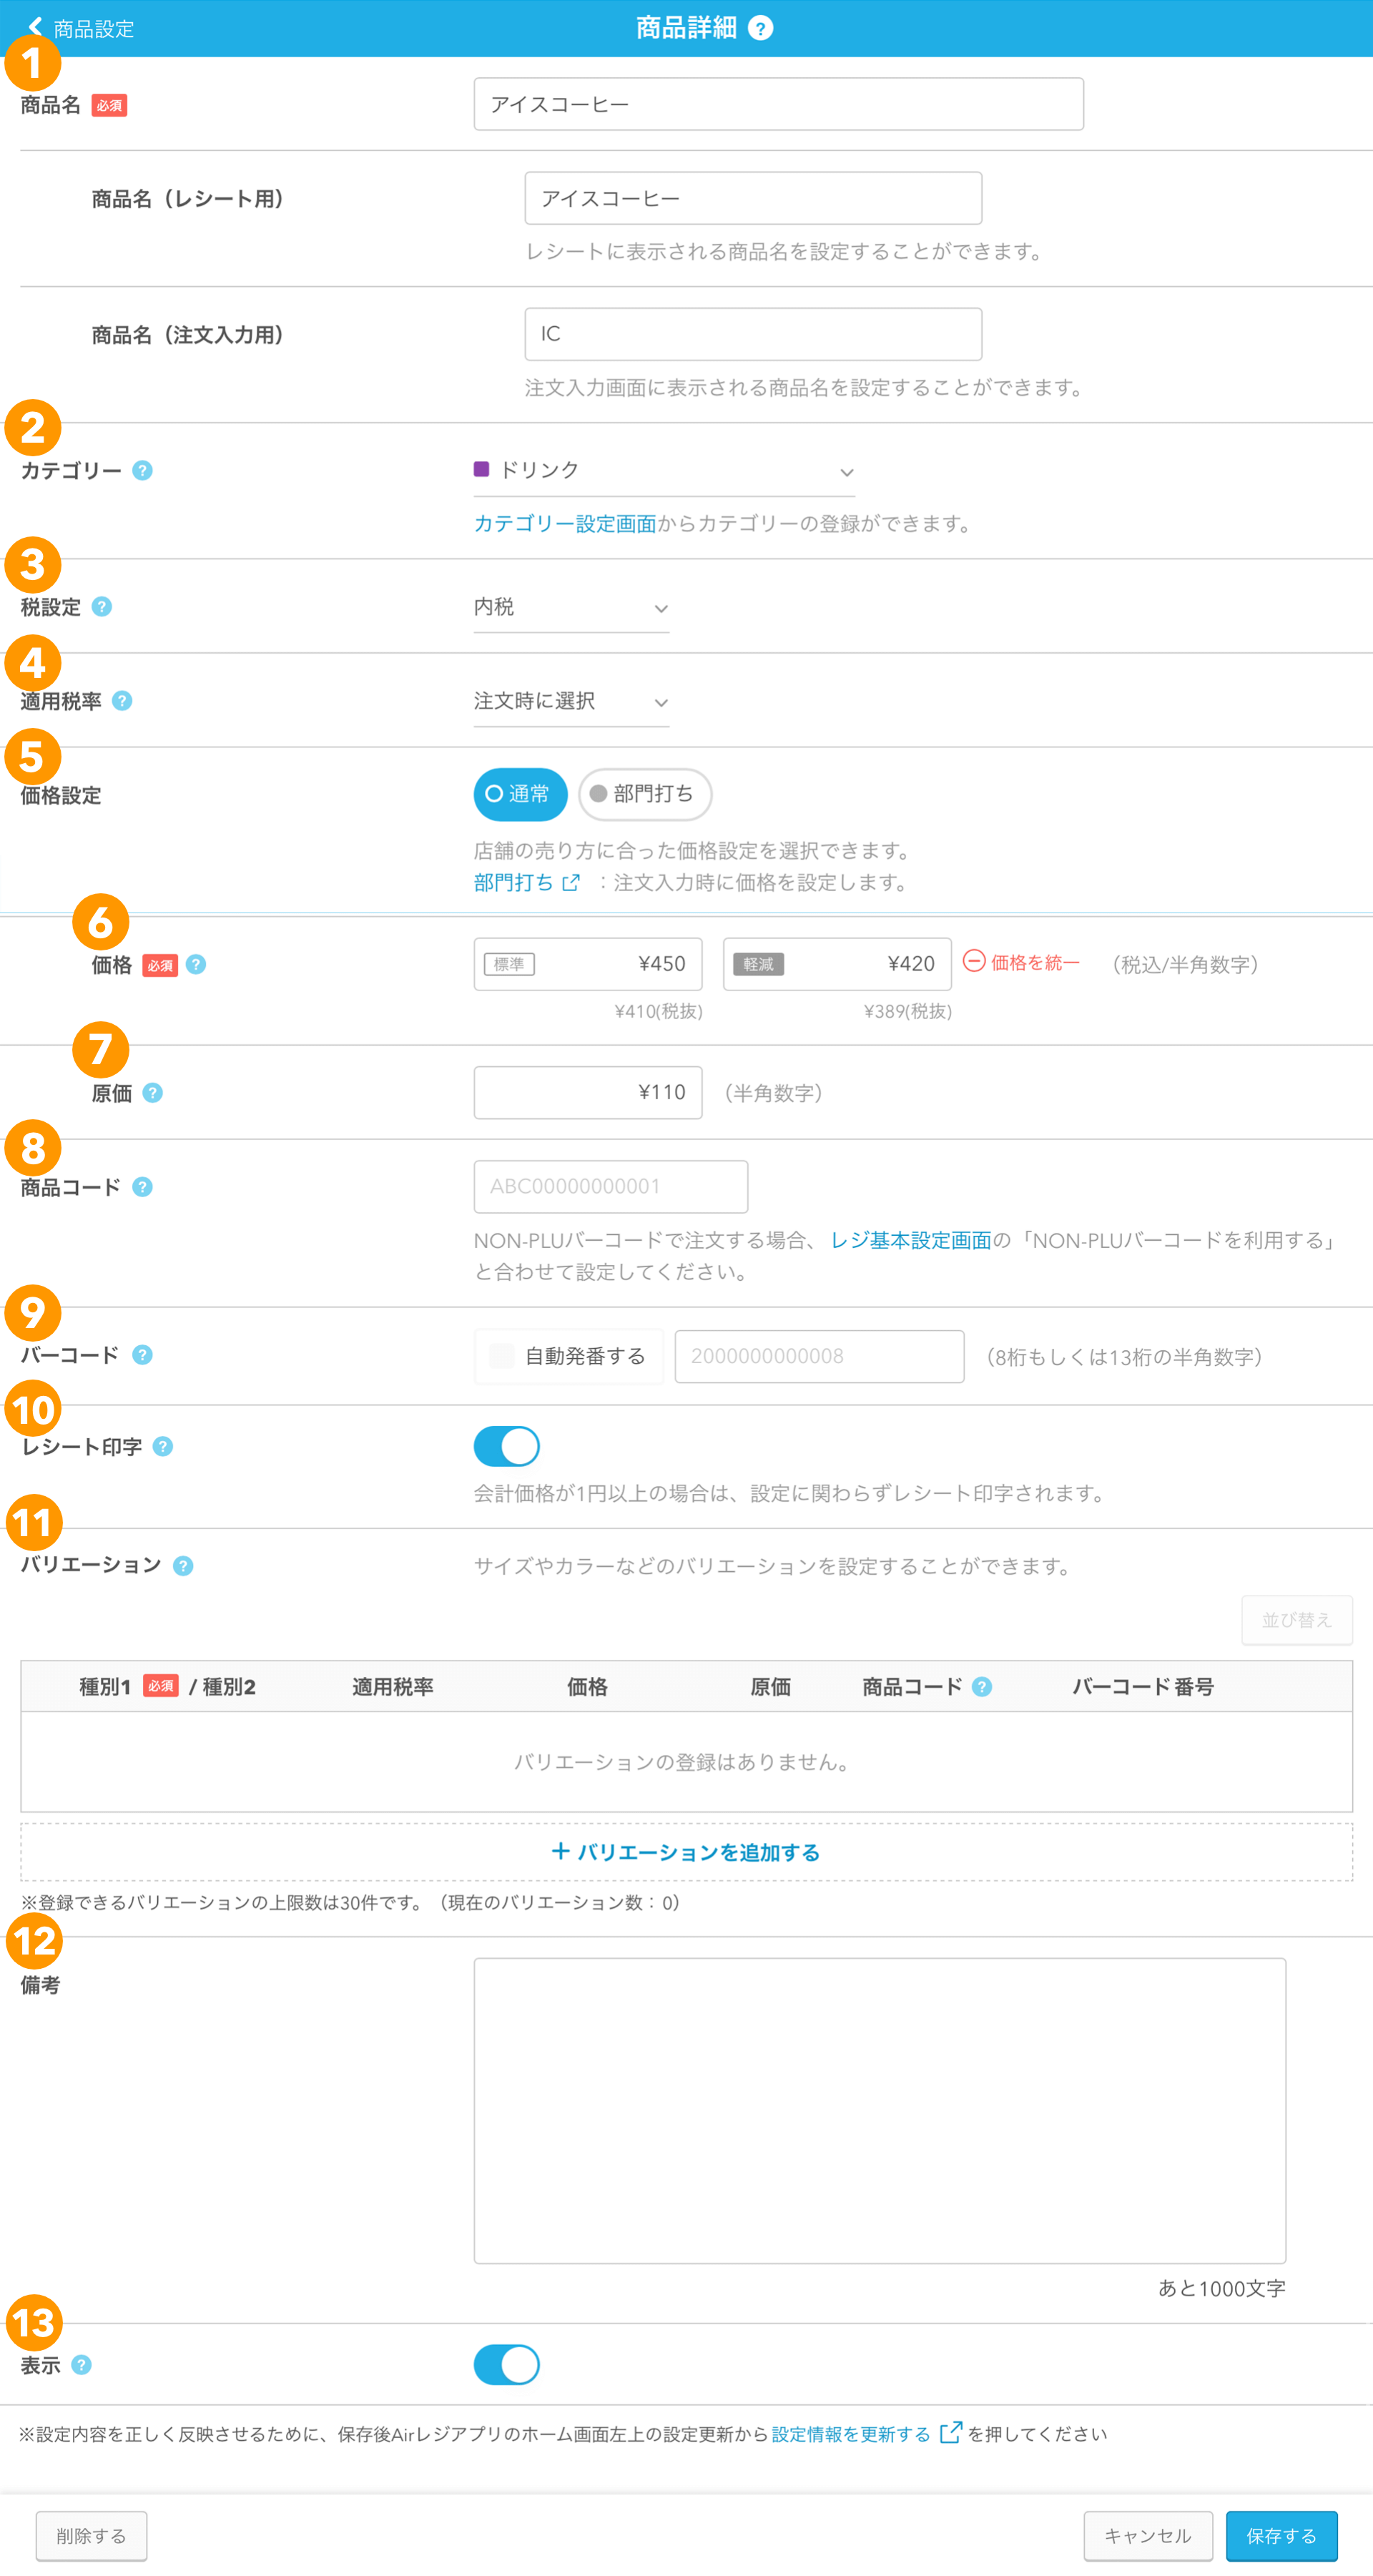 Airレジ 商品詳細画面 arg_900005748126_03.png